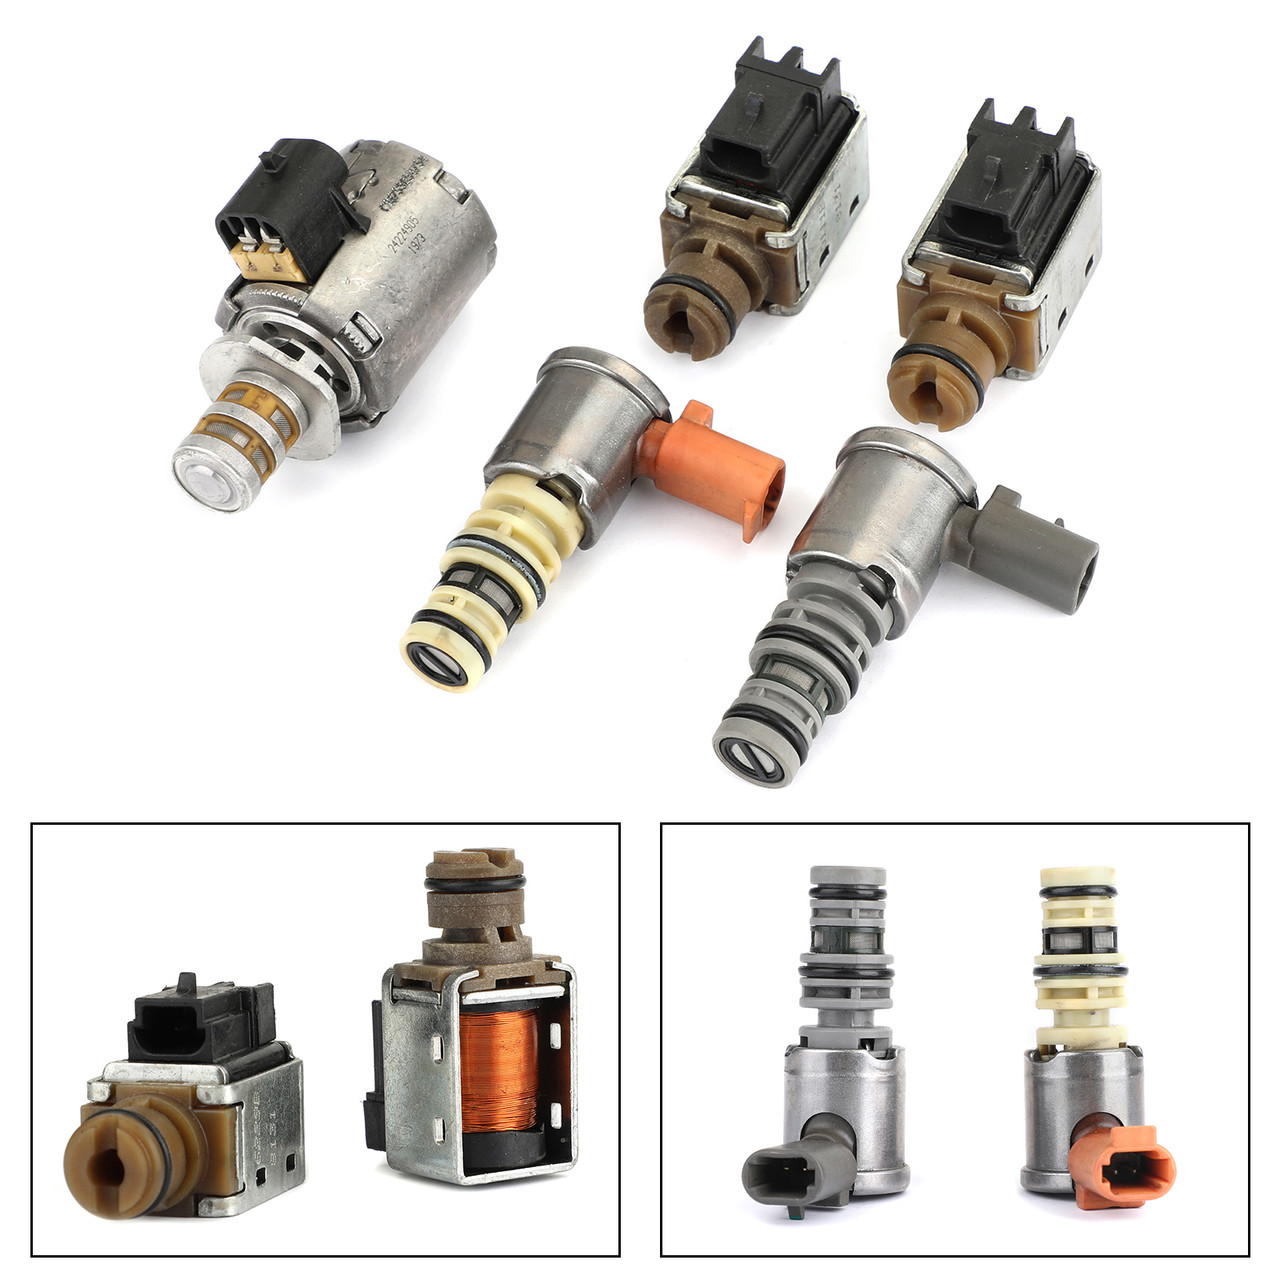 Transmission Solenoid Kit Fits For GM Products with the 4L60E Model Automatic Transmission 03+